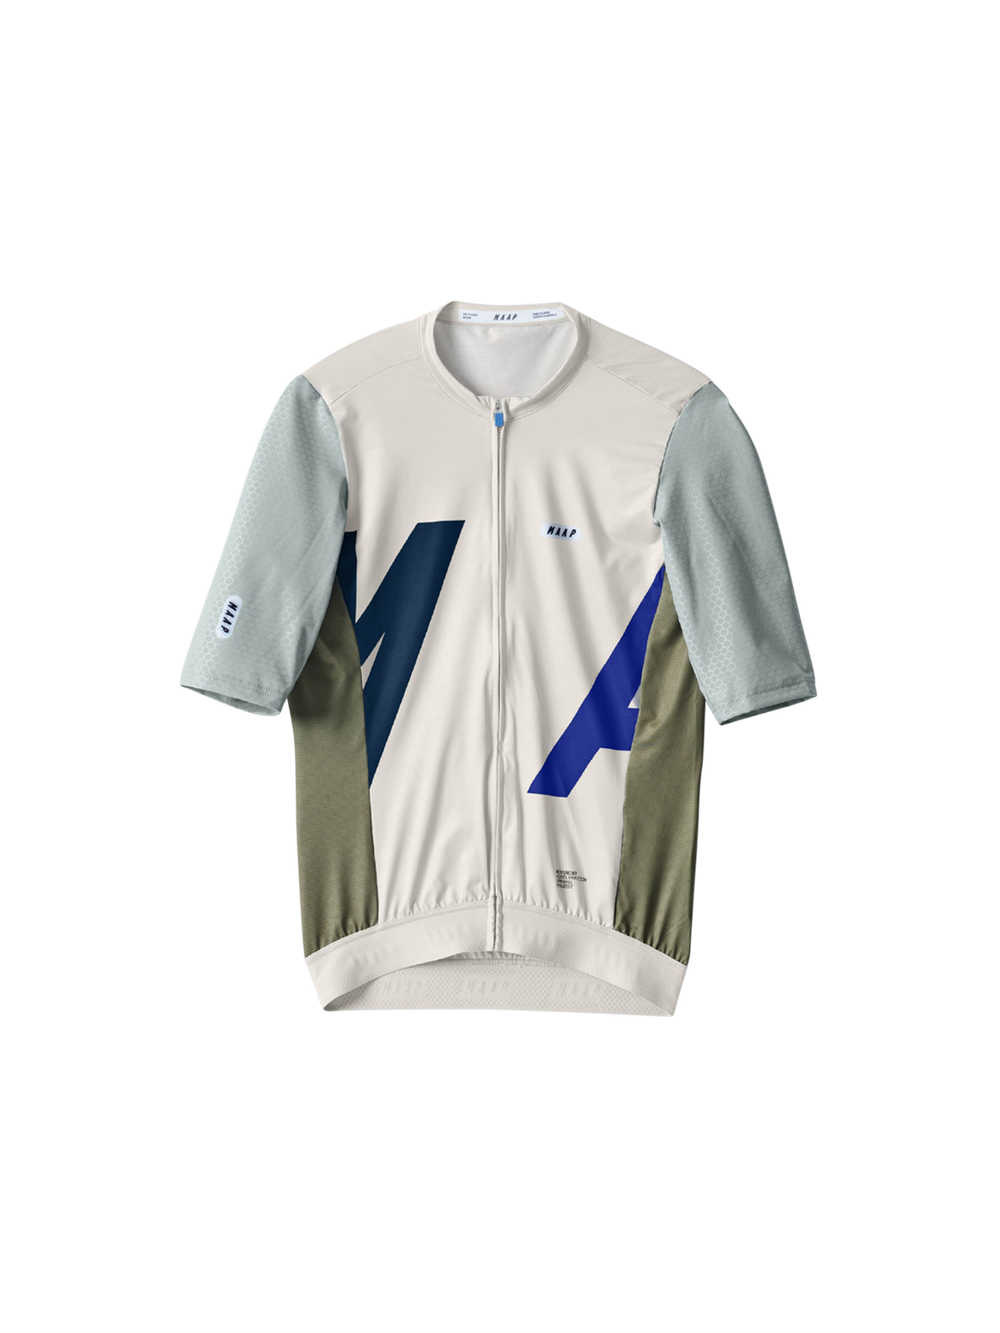 Product Image for Women's Delta Pro Hex Jersey